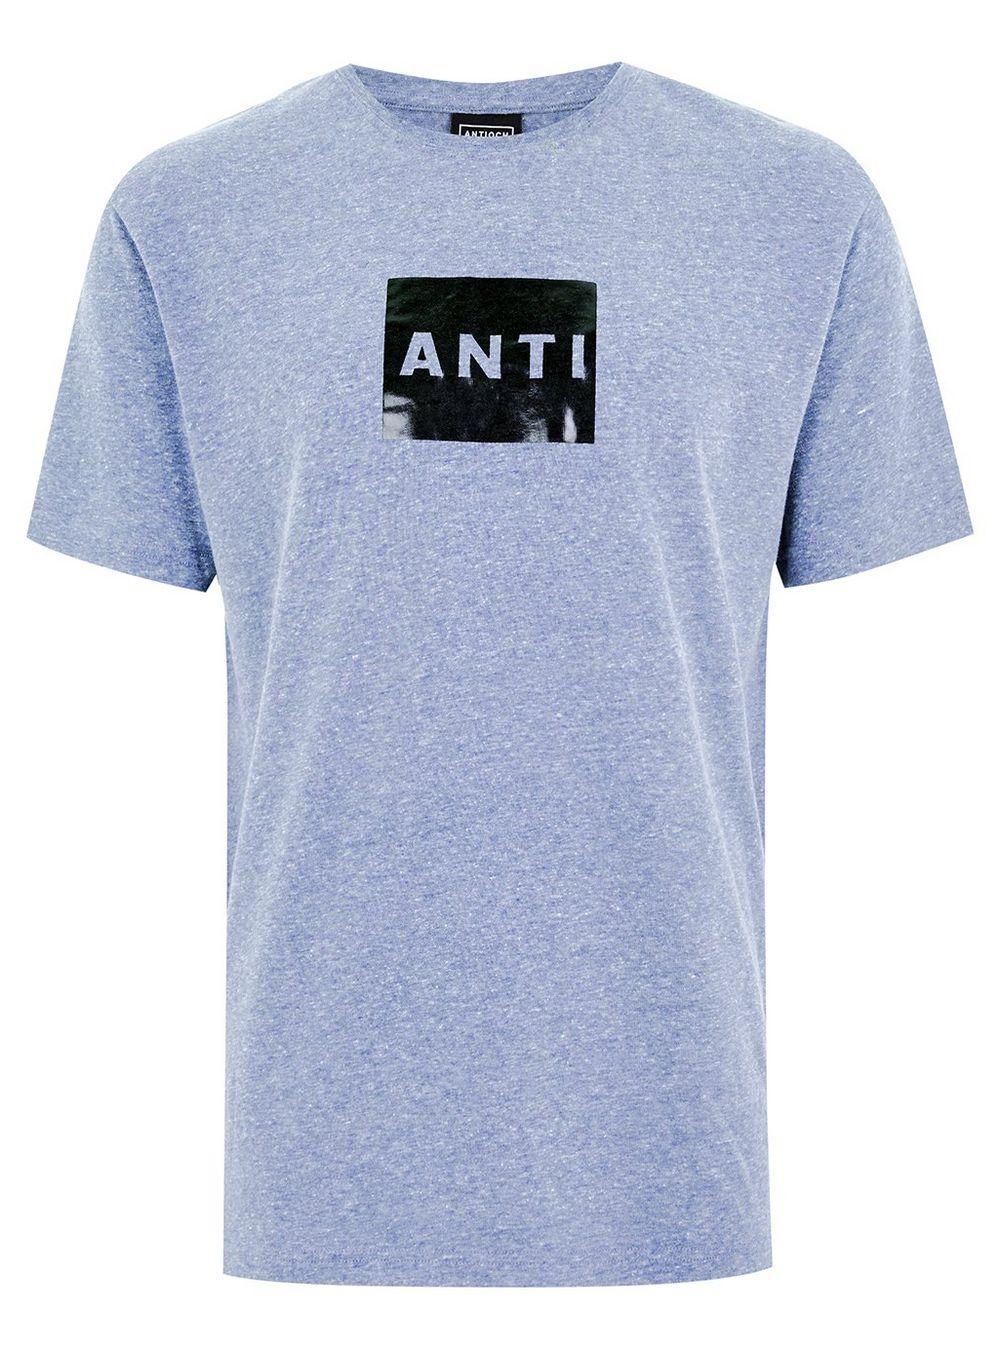 People with Blue Square Logo - ANTIOCH Blue Square Logo T-Shirt* - TOPMAN